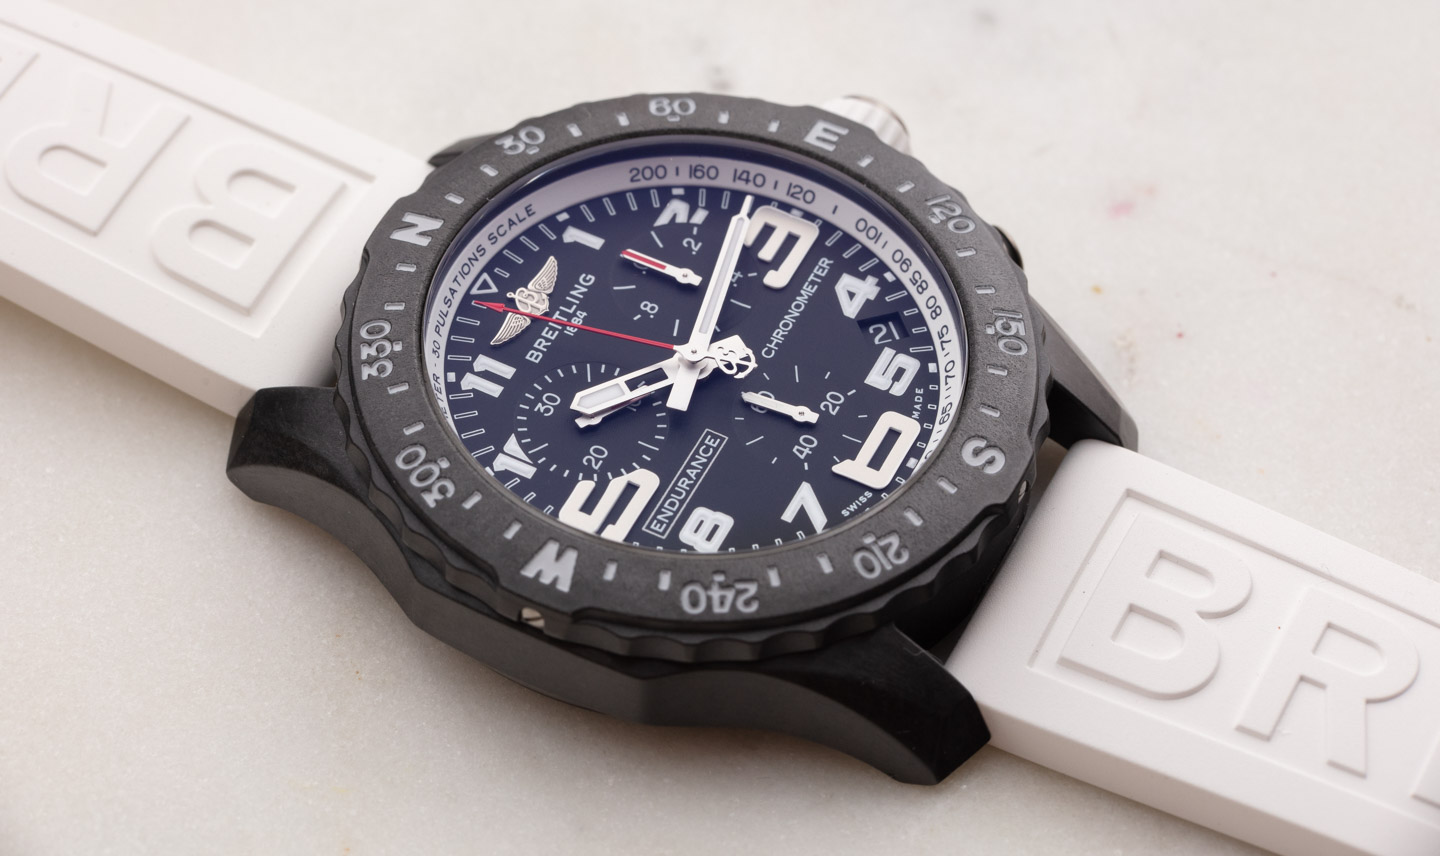 Watch Review: Breitling Endurance Pro